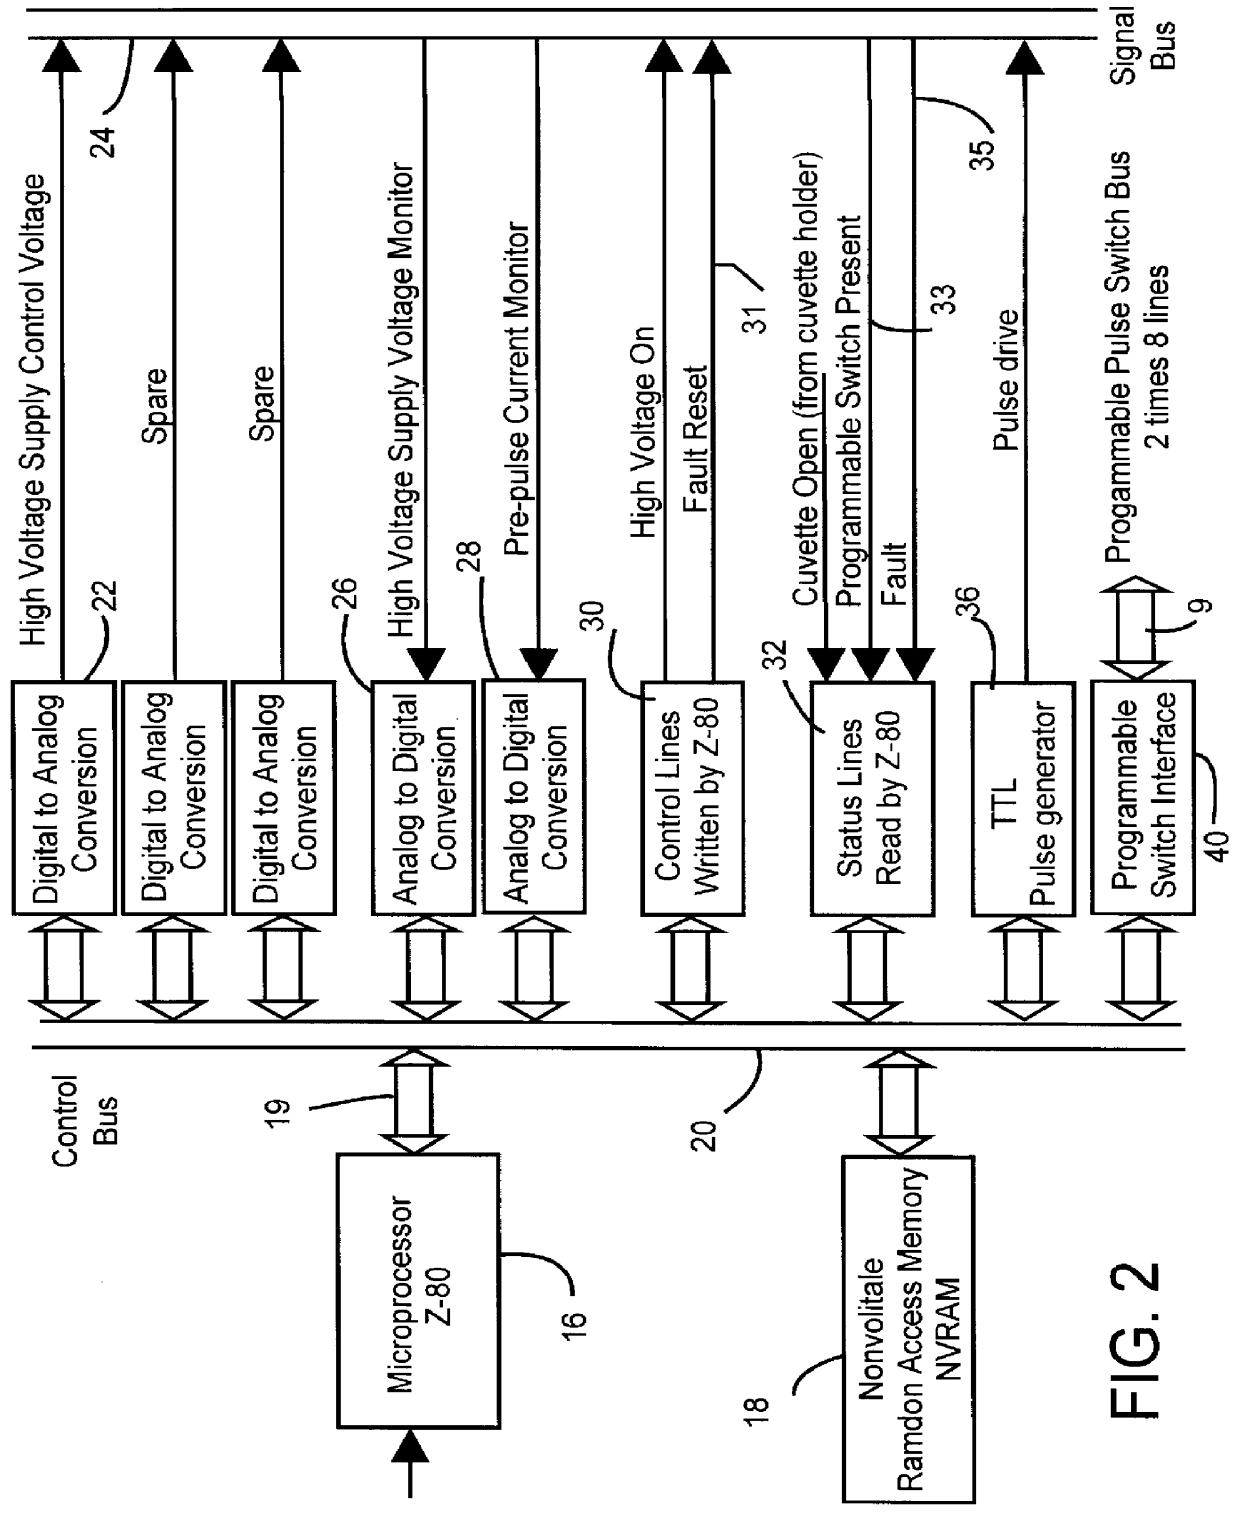 Method and apparatus for treating materials with electrical fields having varying orientations